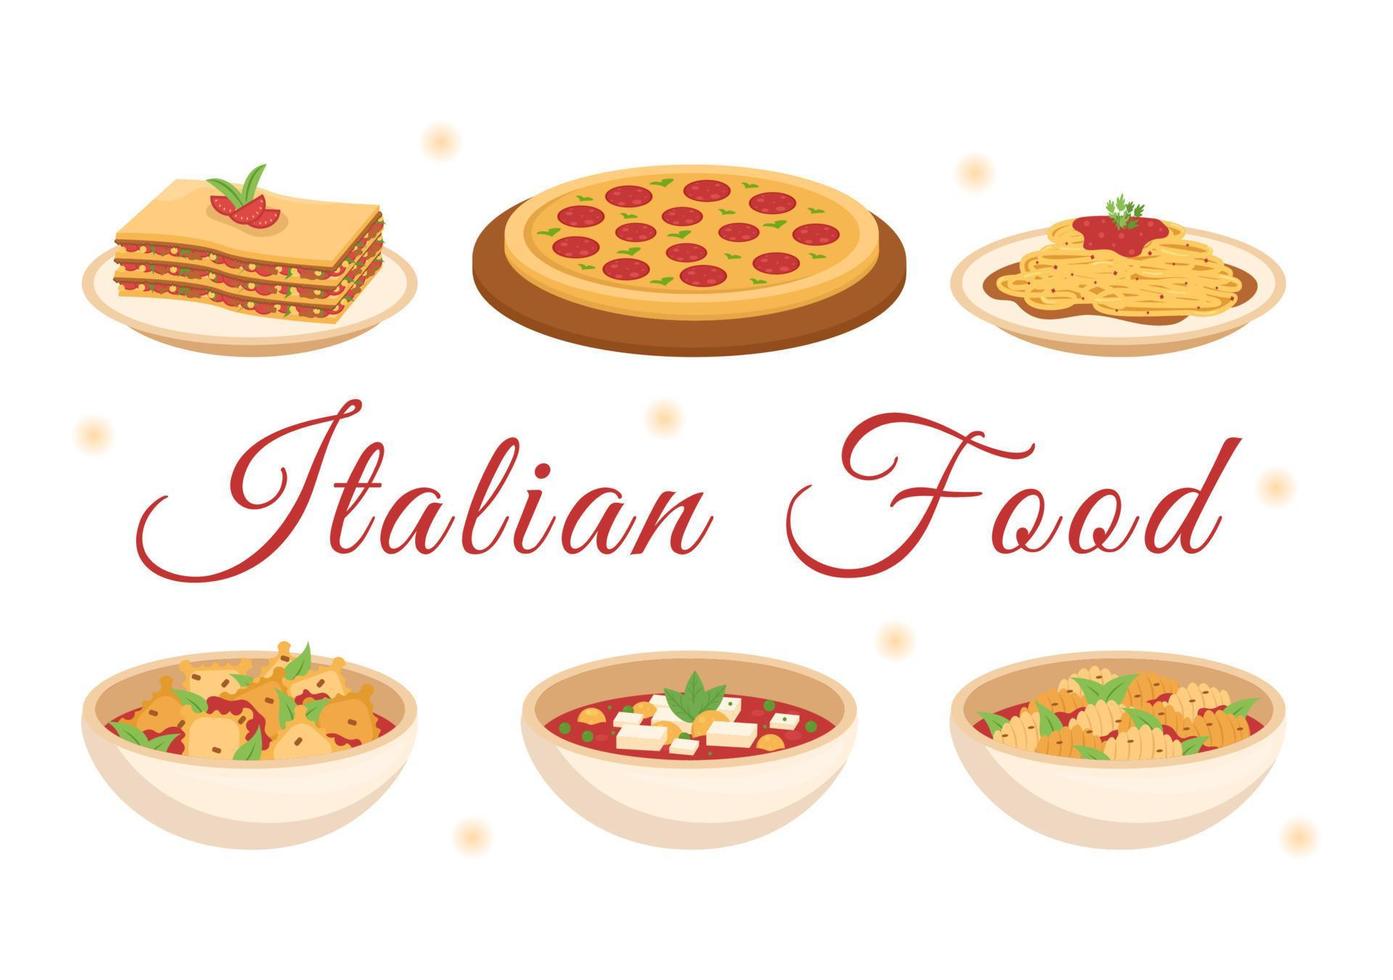 Italian Food Restaurant or Cafeteria with Chef Making Traditional Italian Dishes Pizza or Pasta in Hand Drawn Cartoon Template Illustration vector